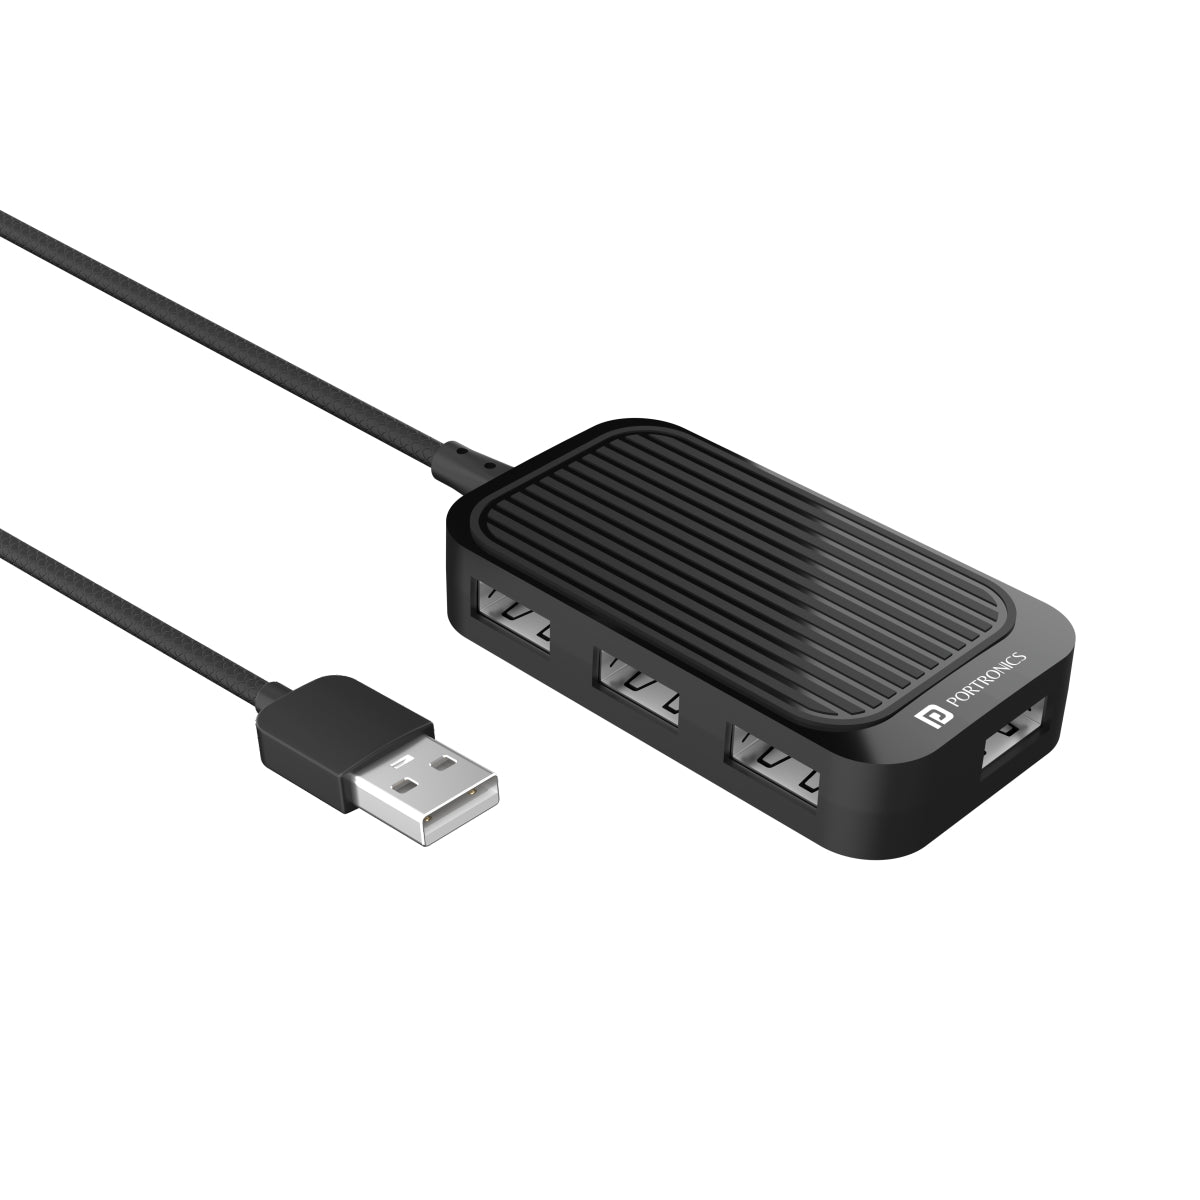 PORTRONICS-Mport 4D Multitask with 4 ports